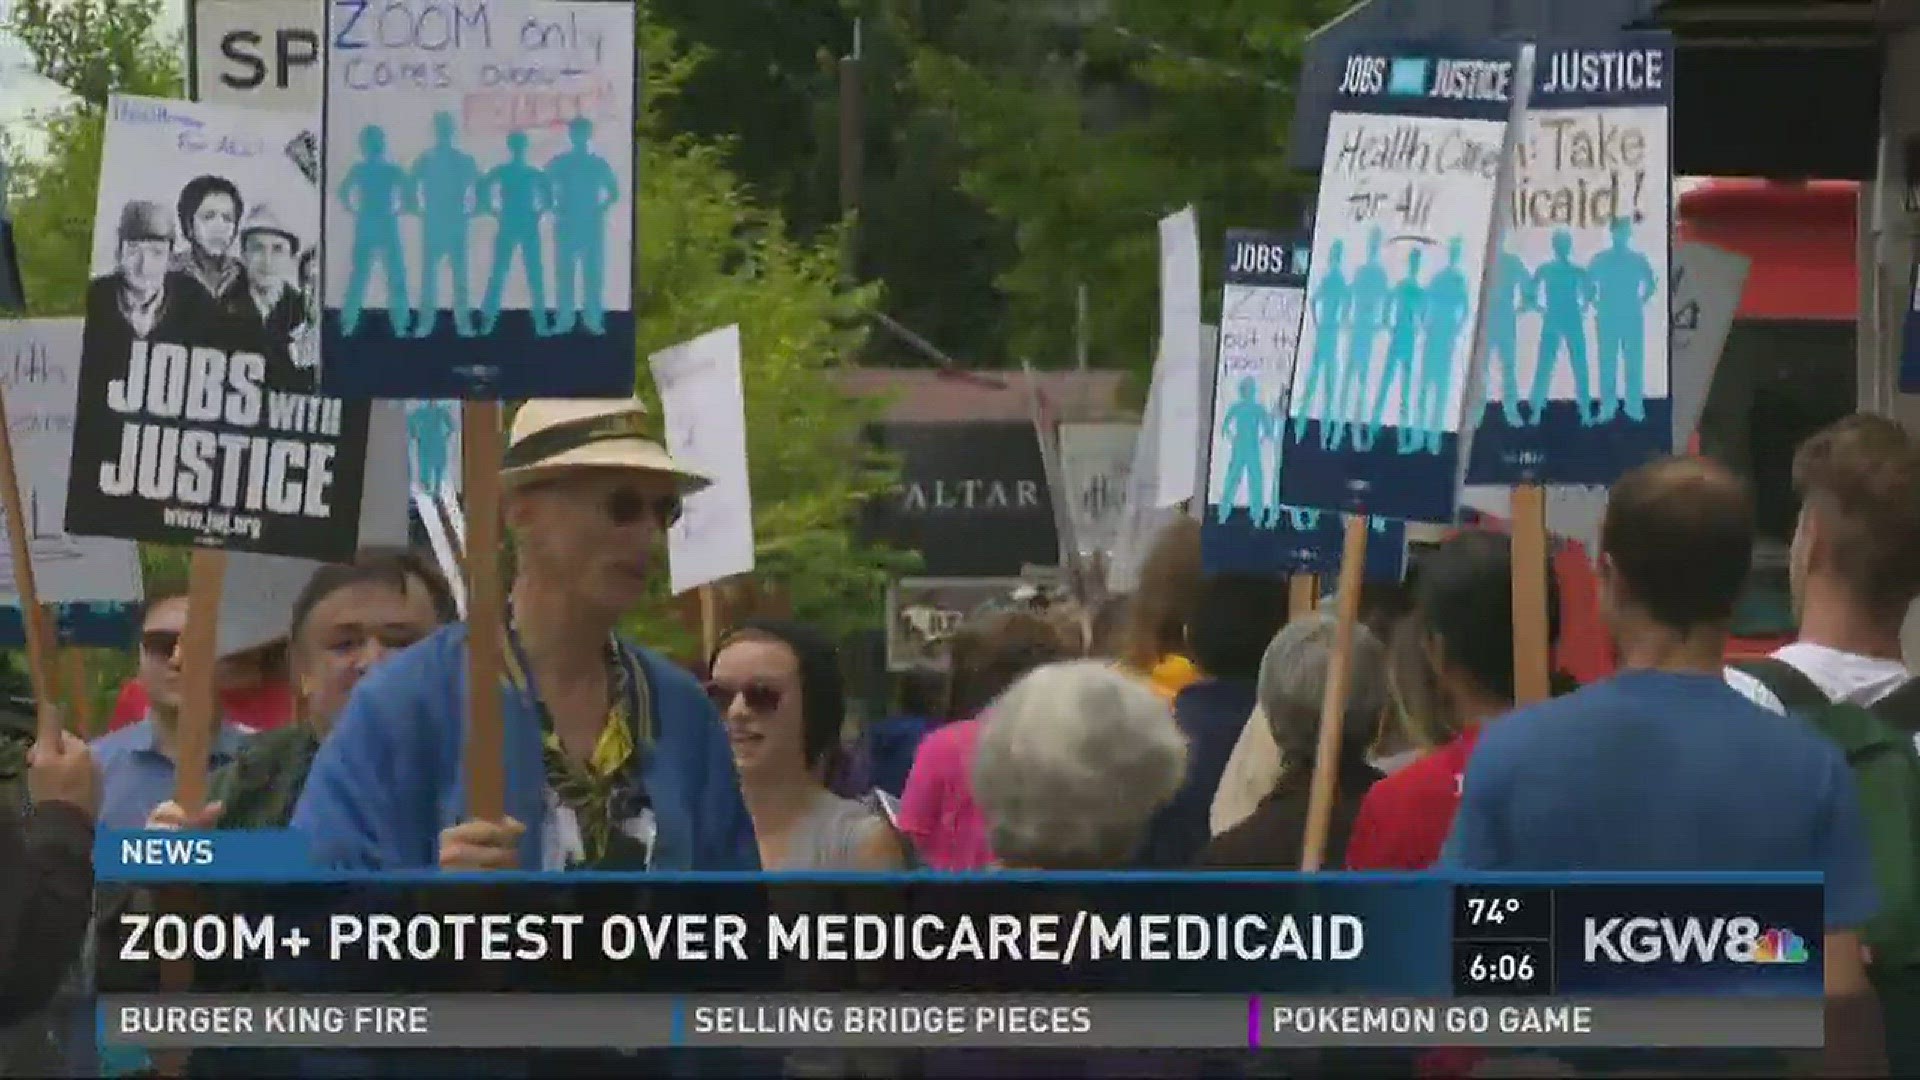 Zoomcare protest over Medicare, Medicaid